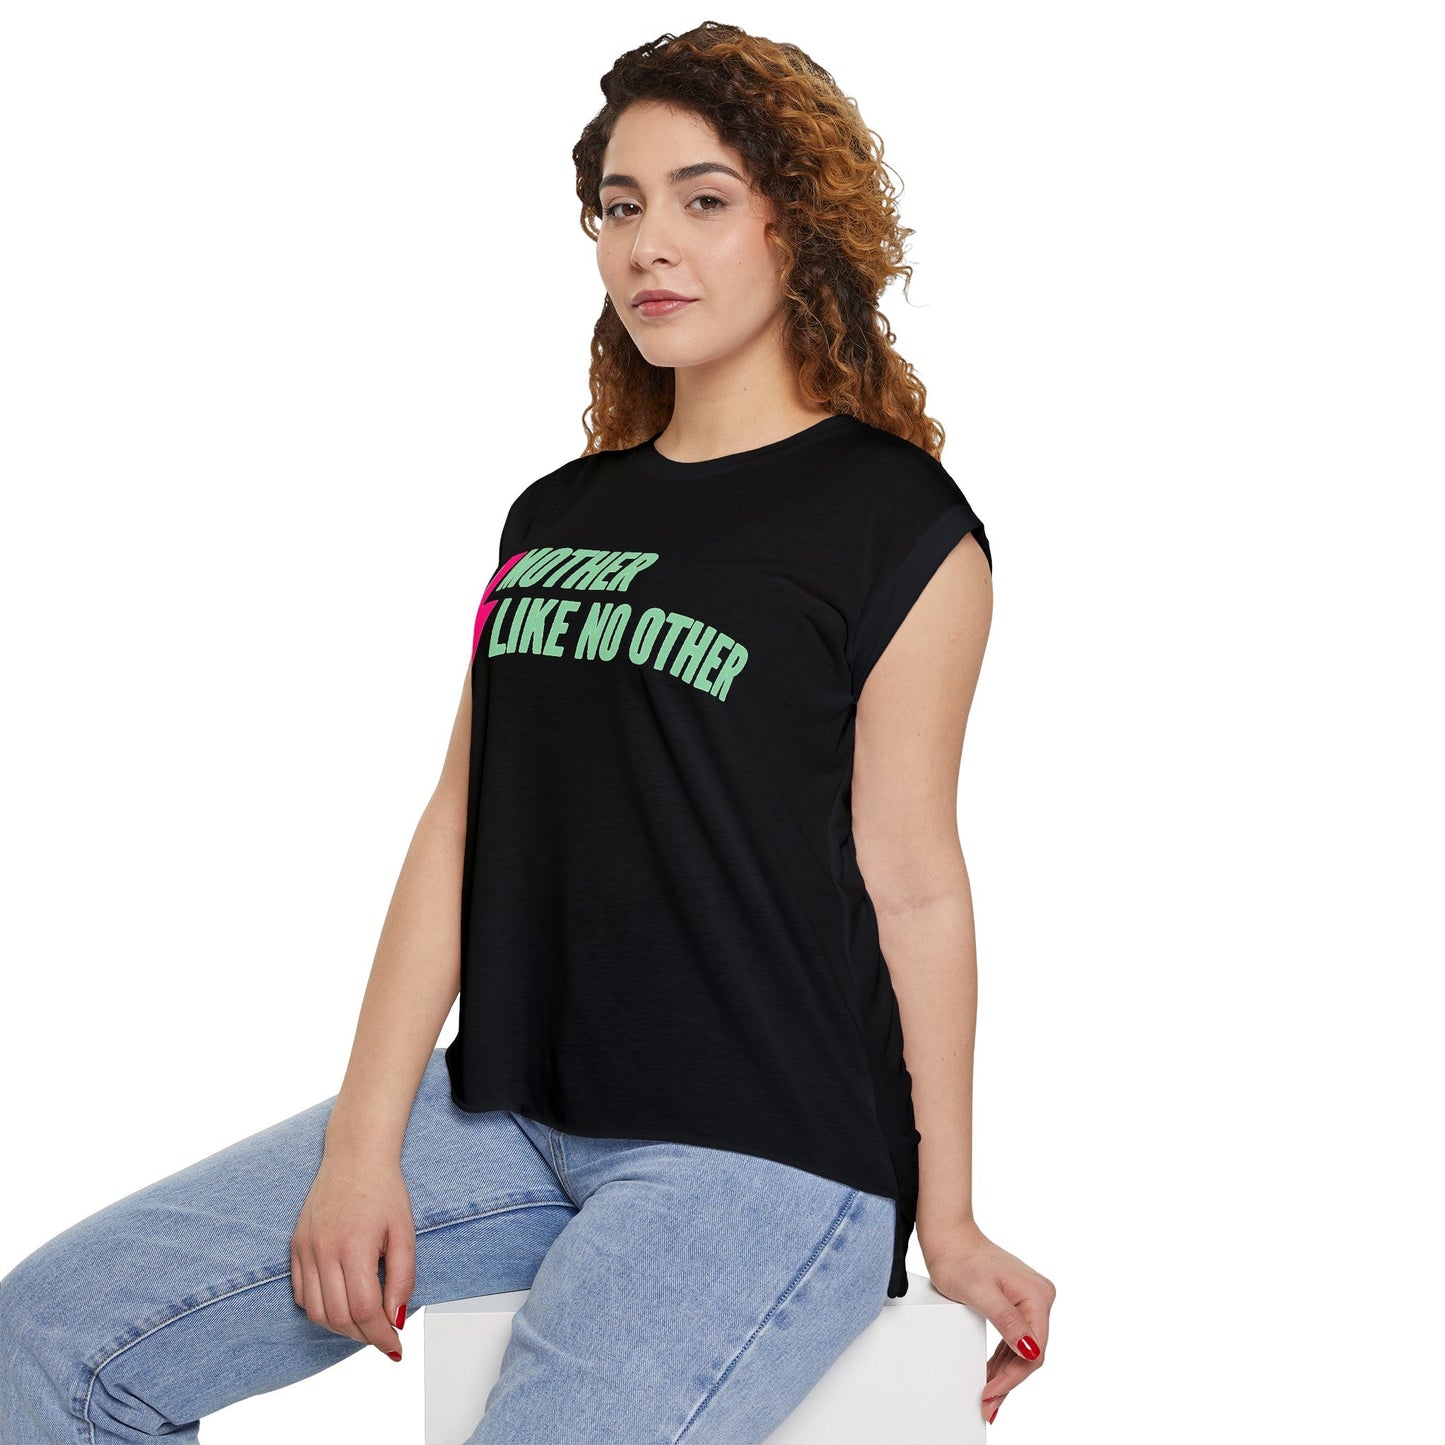 Mother Like No Other ⚡ Lighting Bolt Women’s Flowy Rolled Cuffs Muscle Tee | Mothers Day